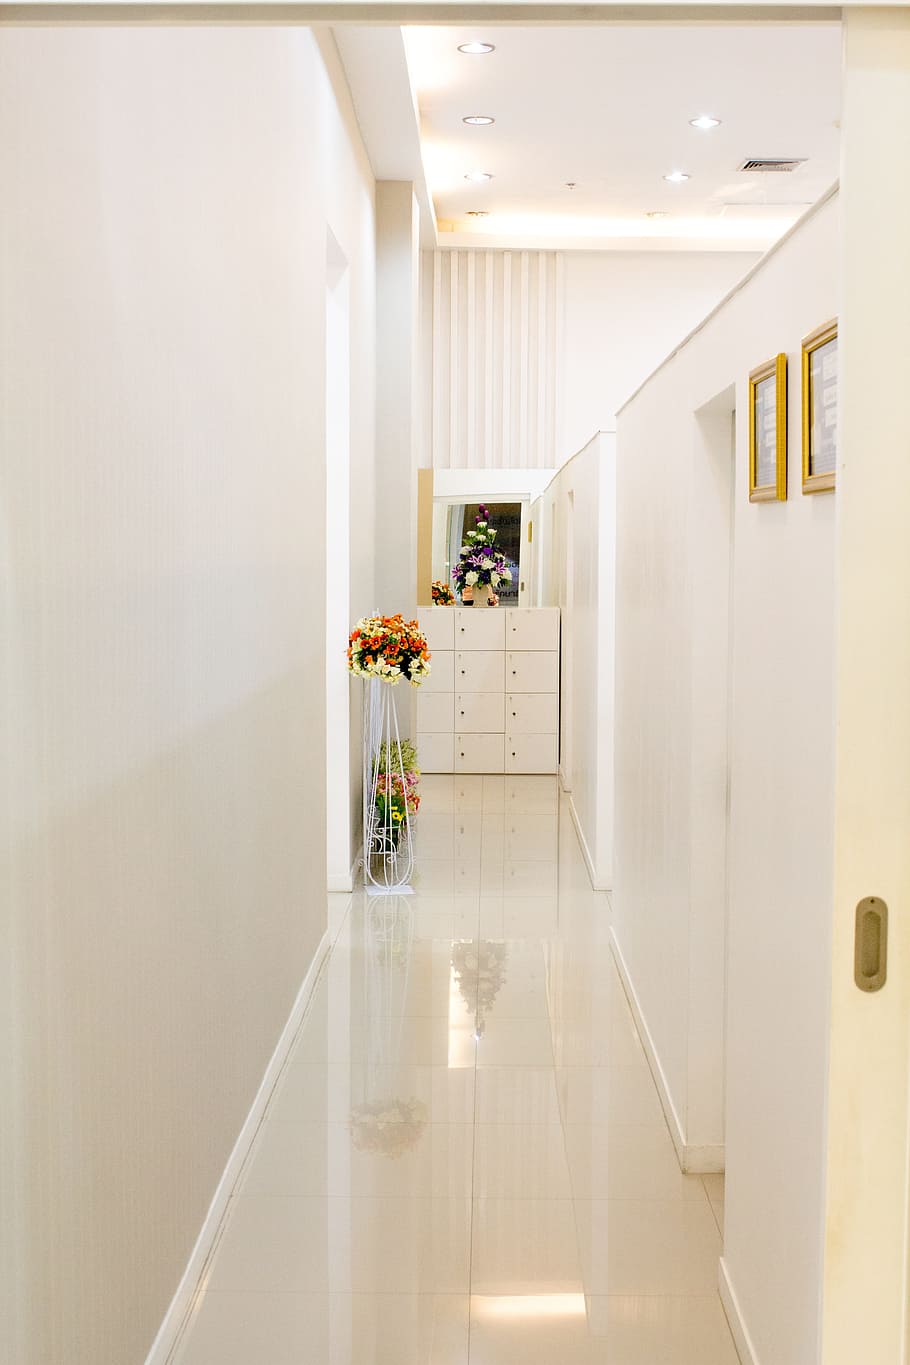 White Room, Passage, Door, Entrance, indoors, architecture, modern, no People, flooring, home Interior